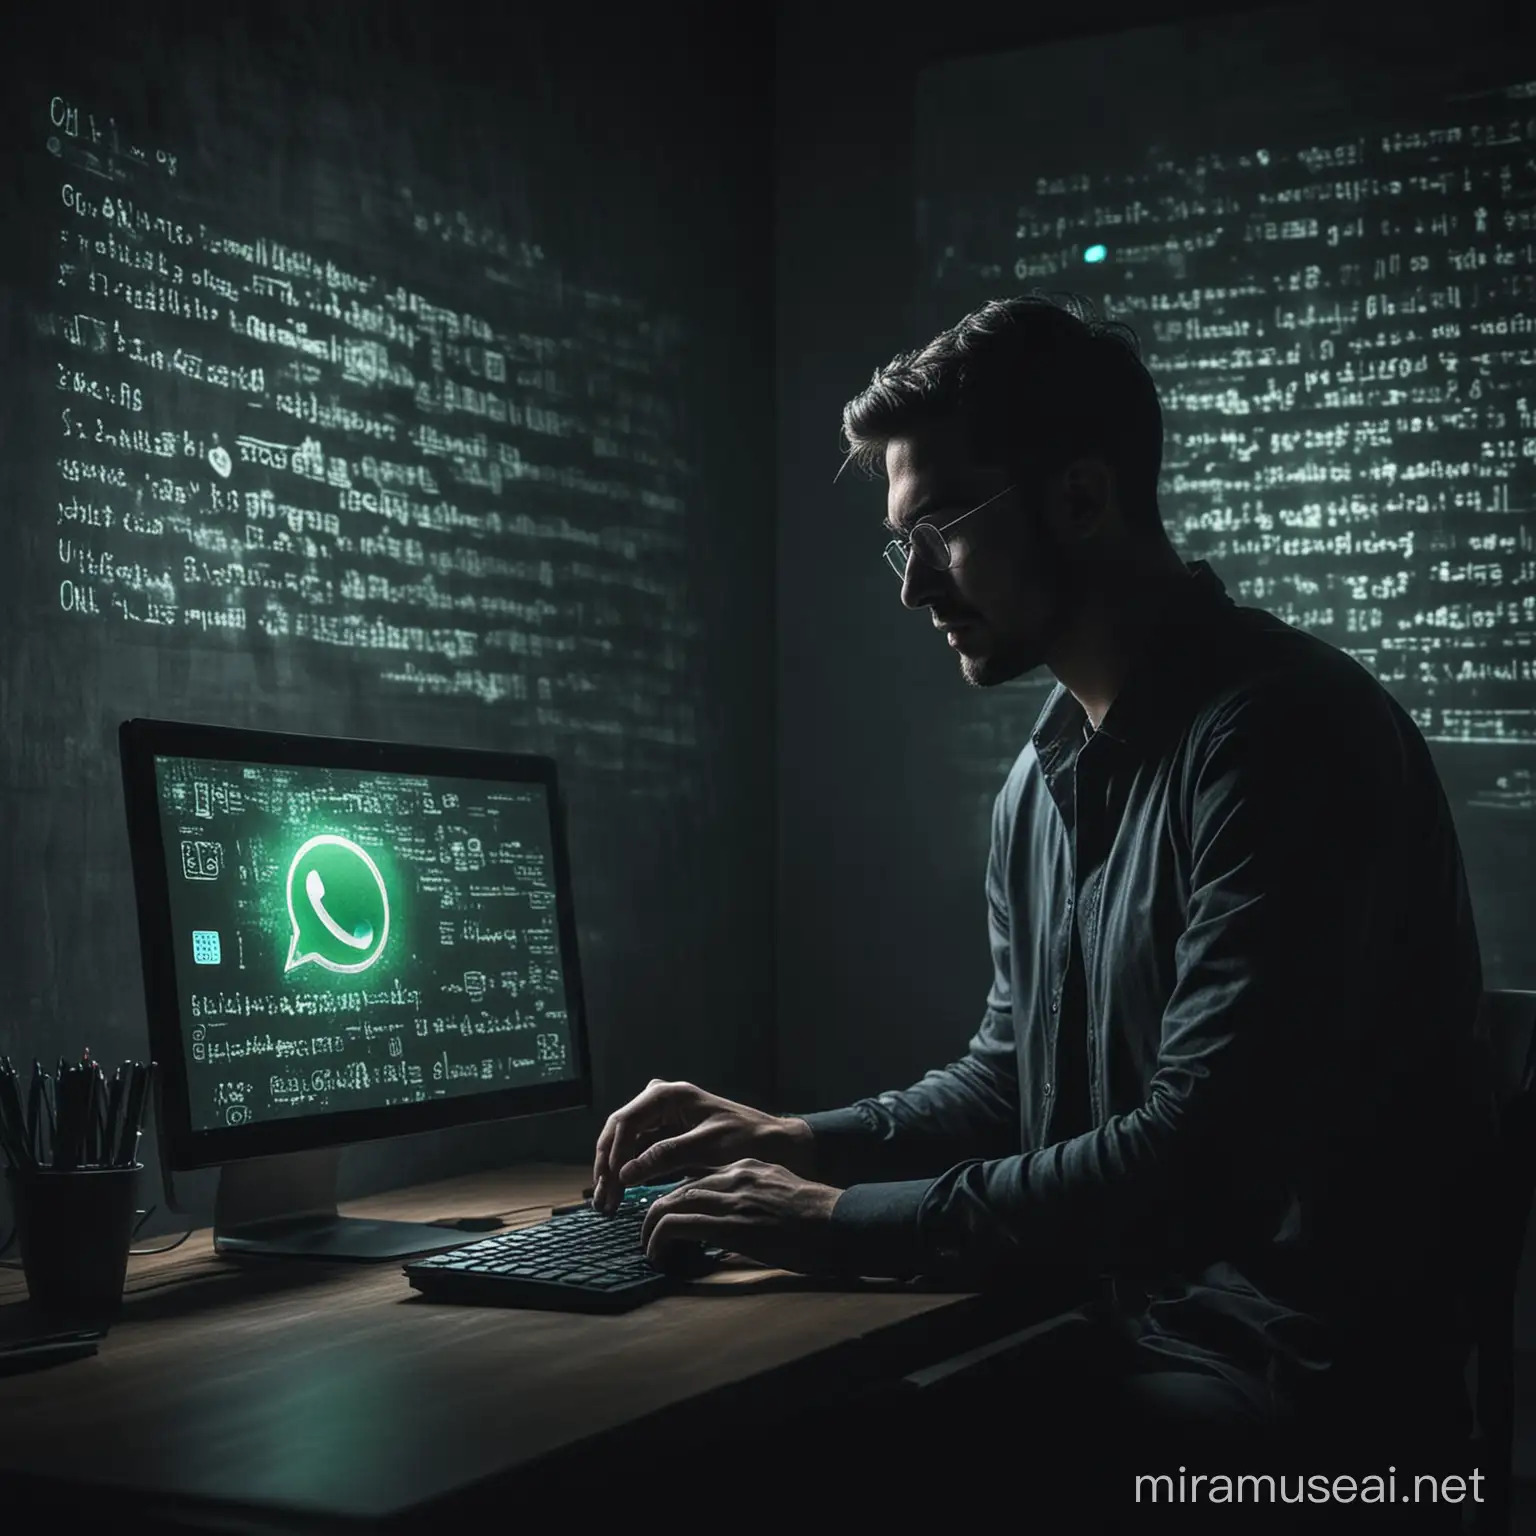 Savvy Individual Crafting False WhatsApp Chat on Computer in Dimly Lit Space